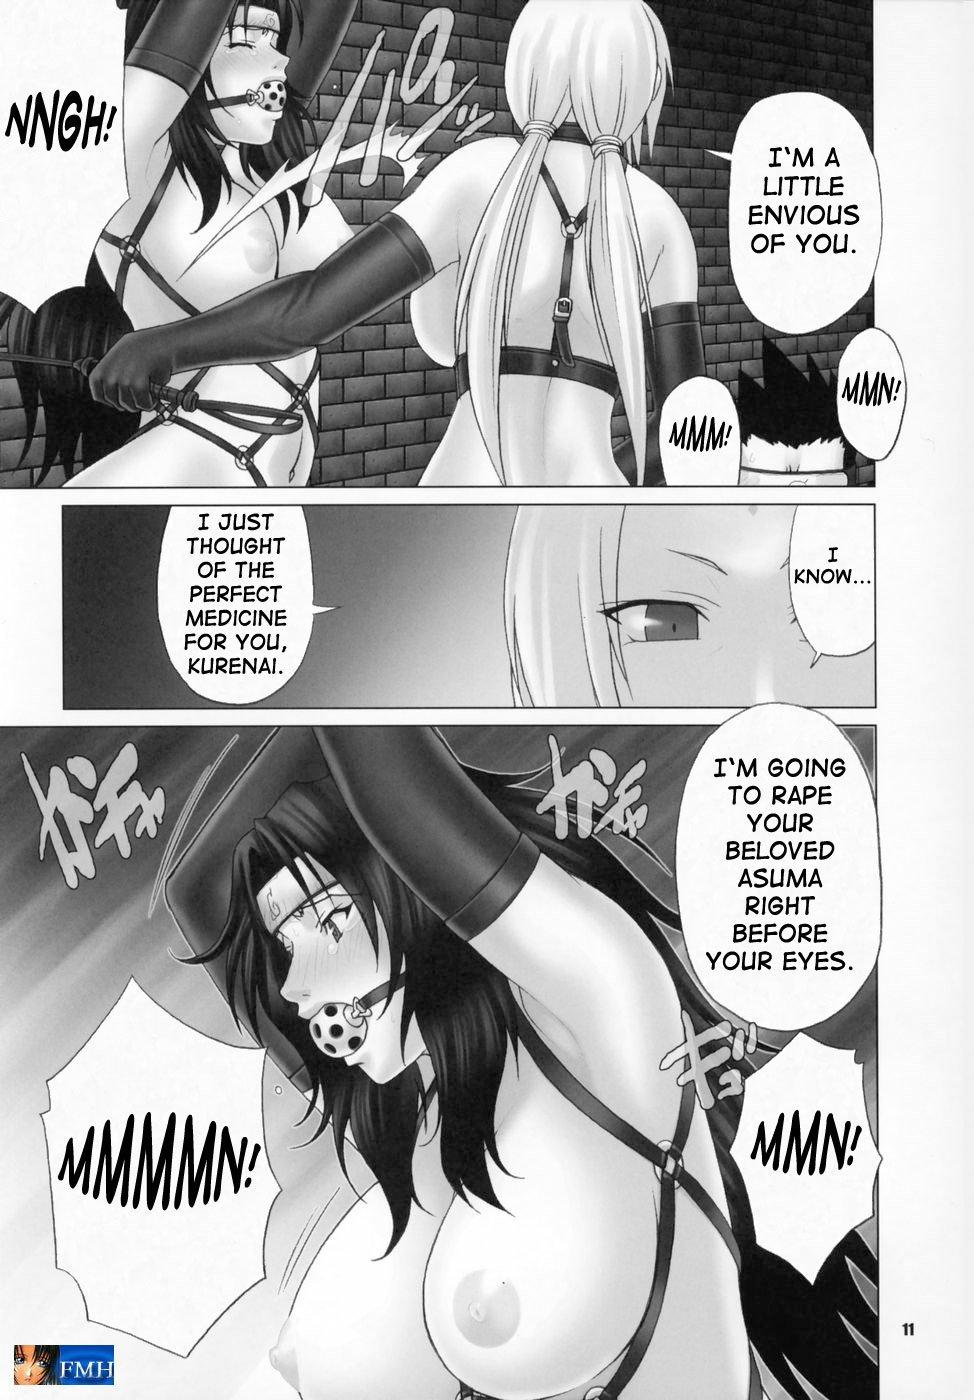 Sucking Cocks Issues - Naruto Lesbian Sex - Page 10